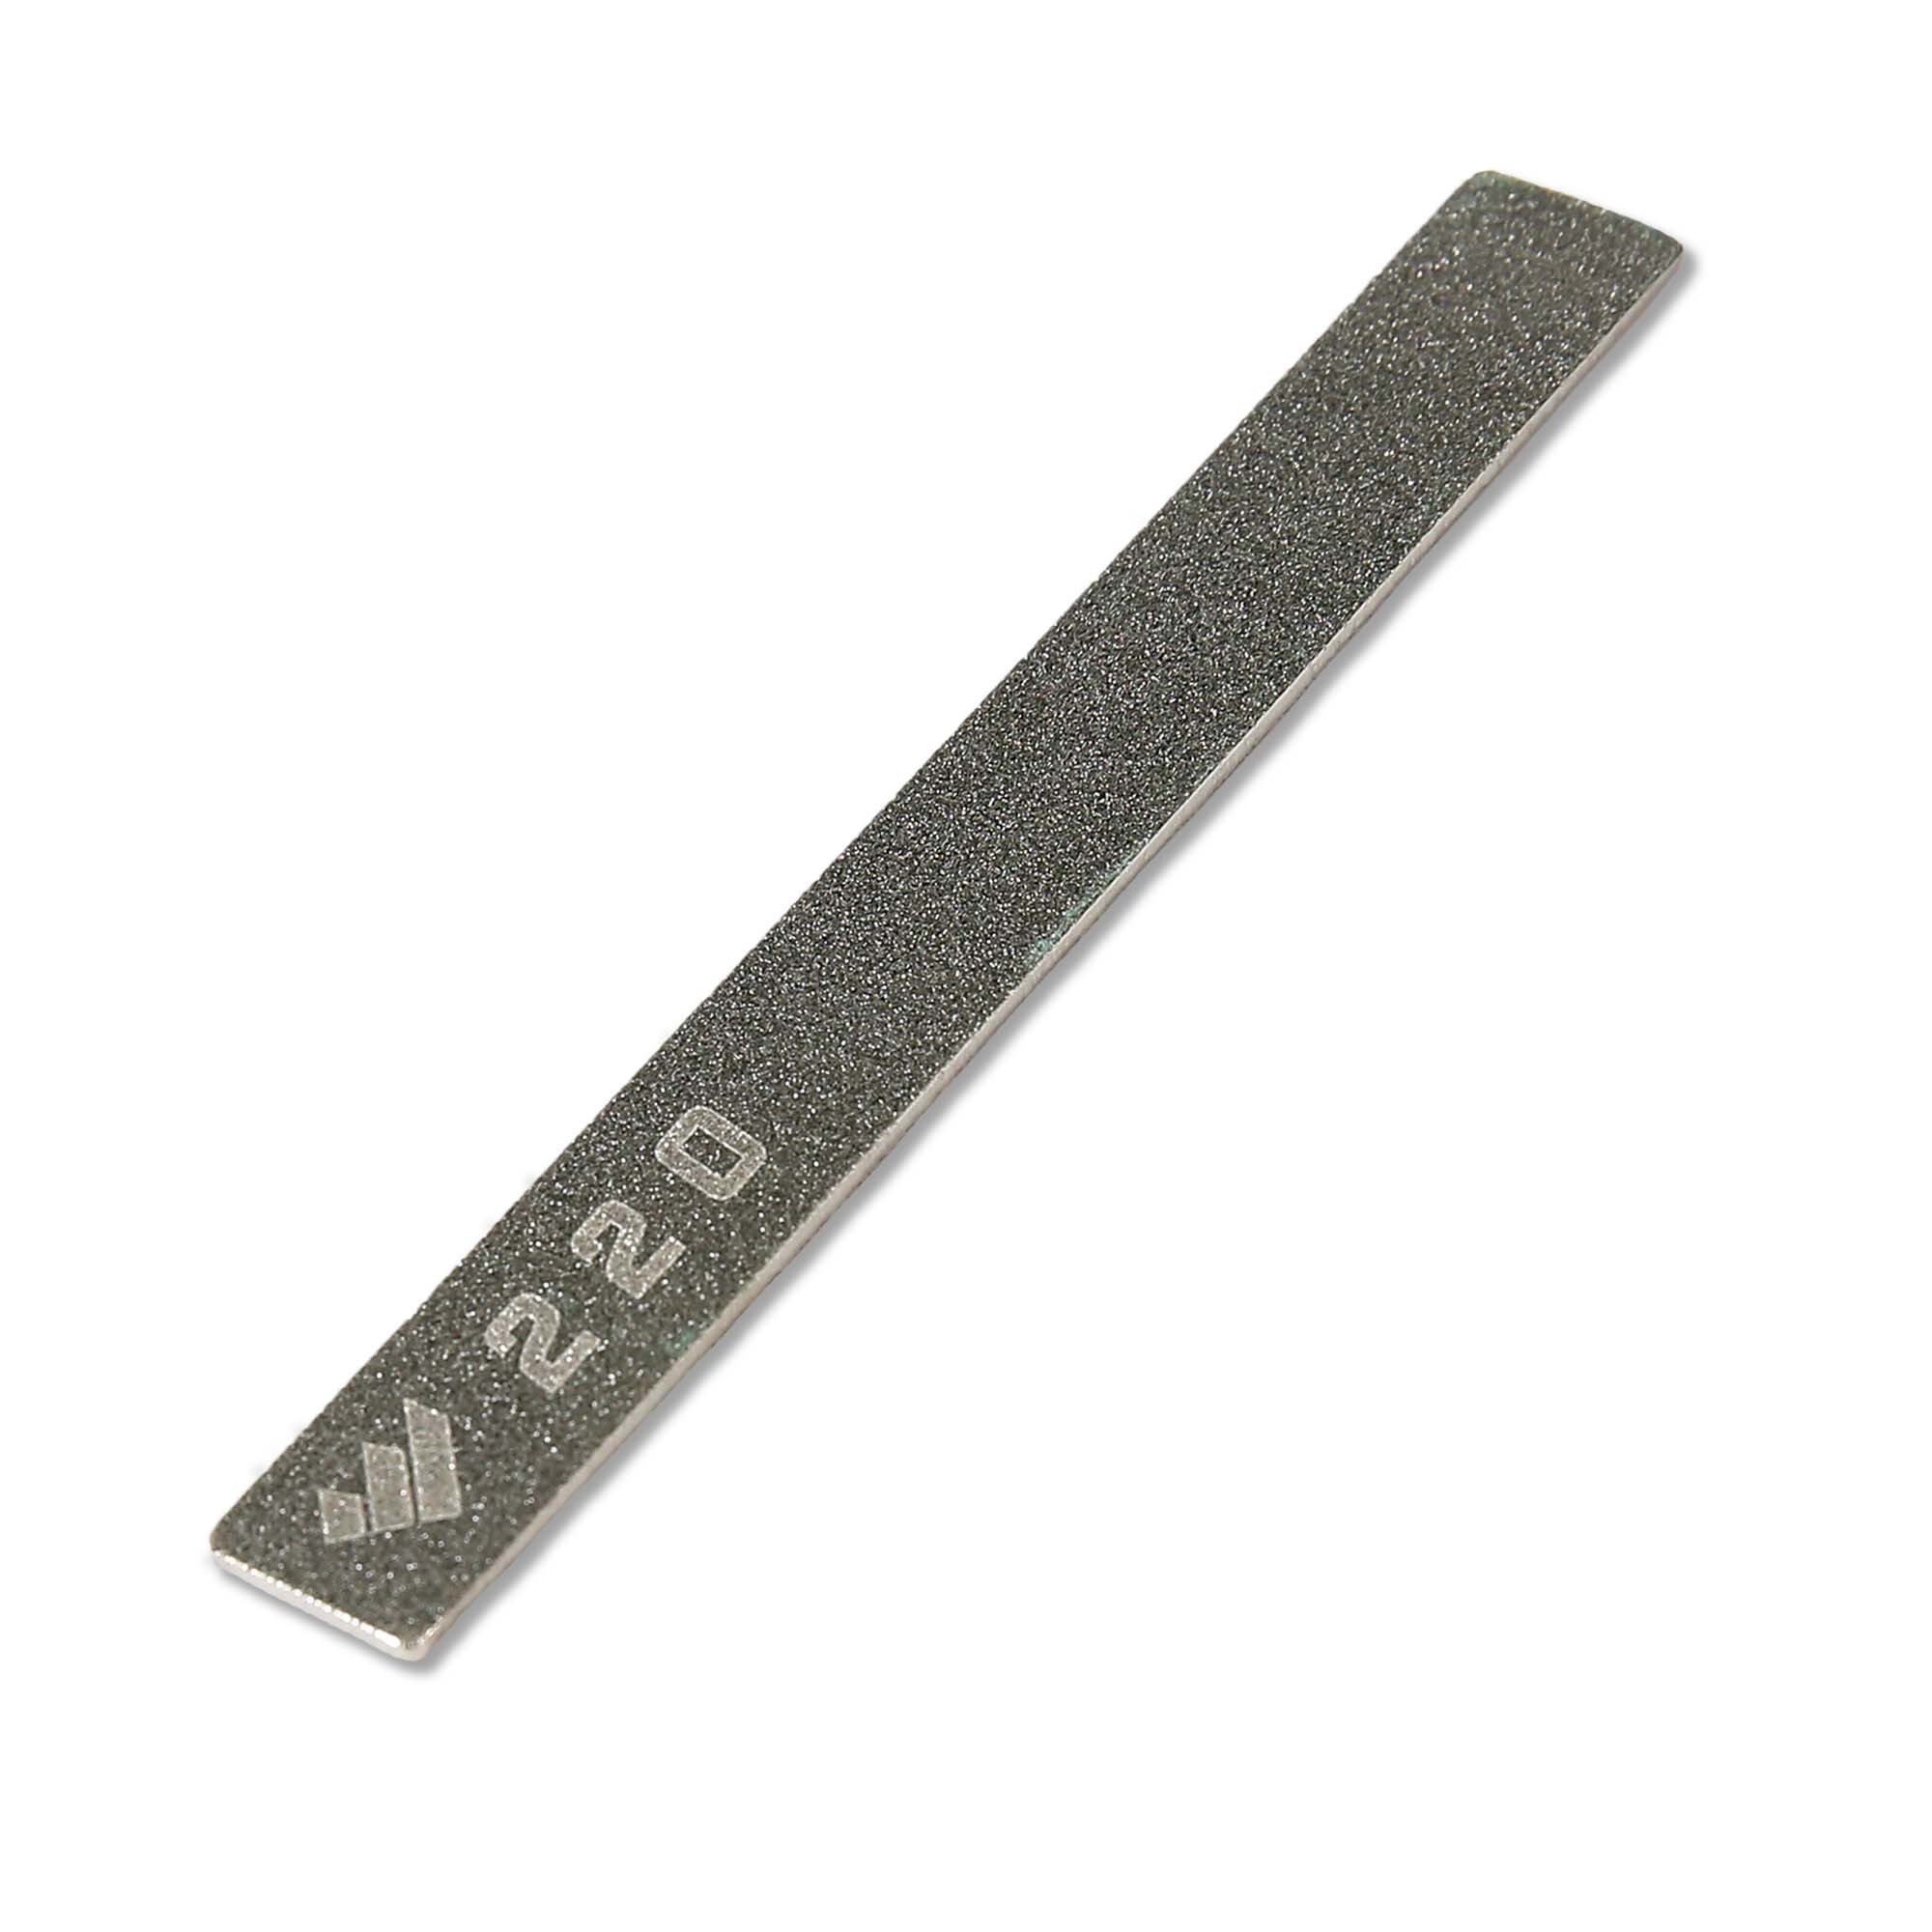 Replacement 220 Grit Plate for the Precision Adjust™ - Work Sharp Sharpeners